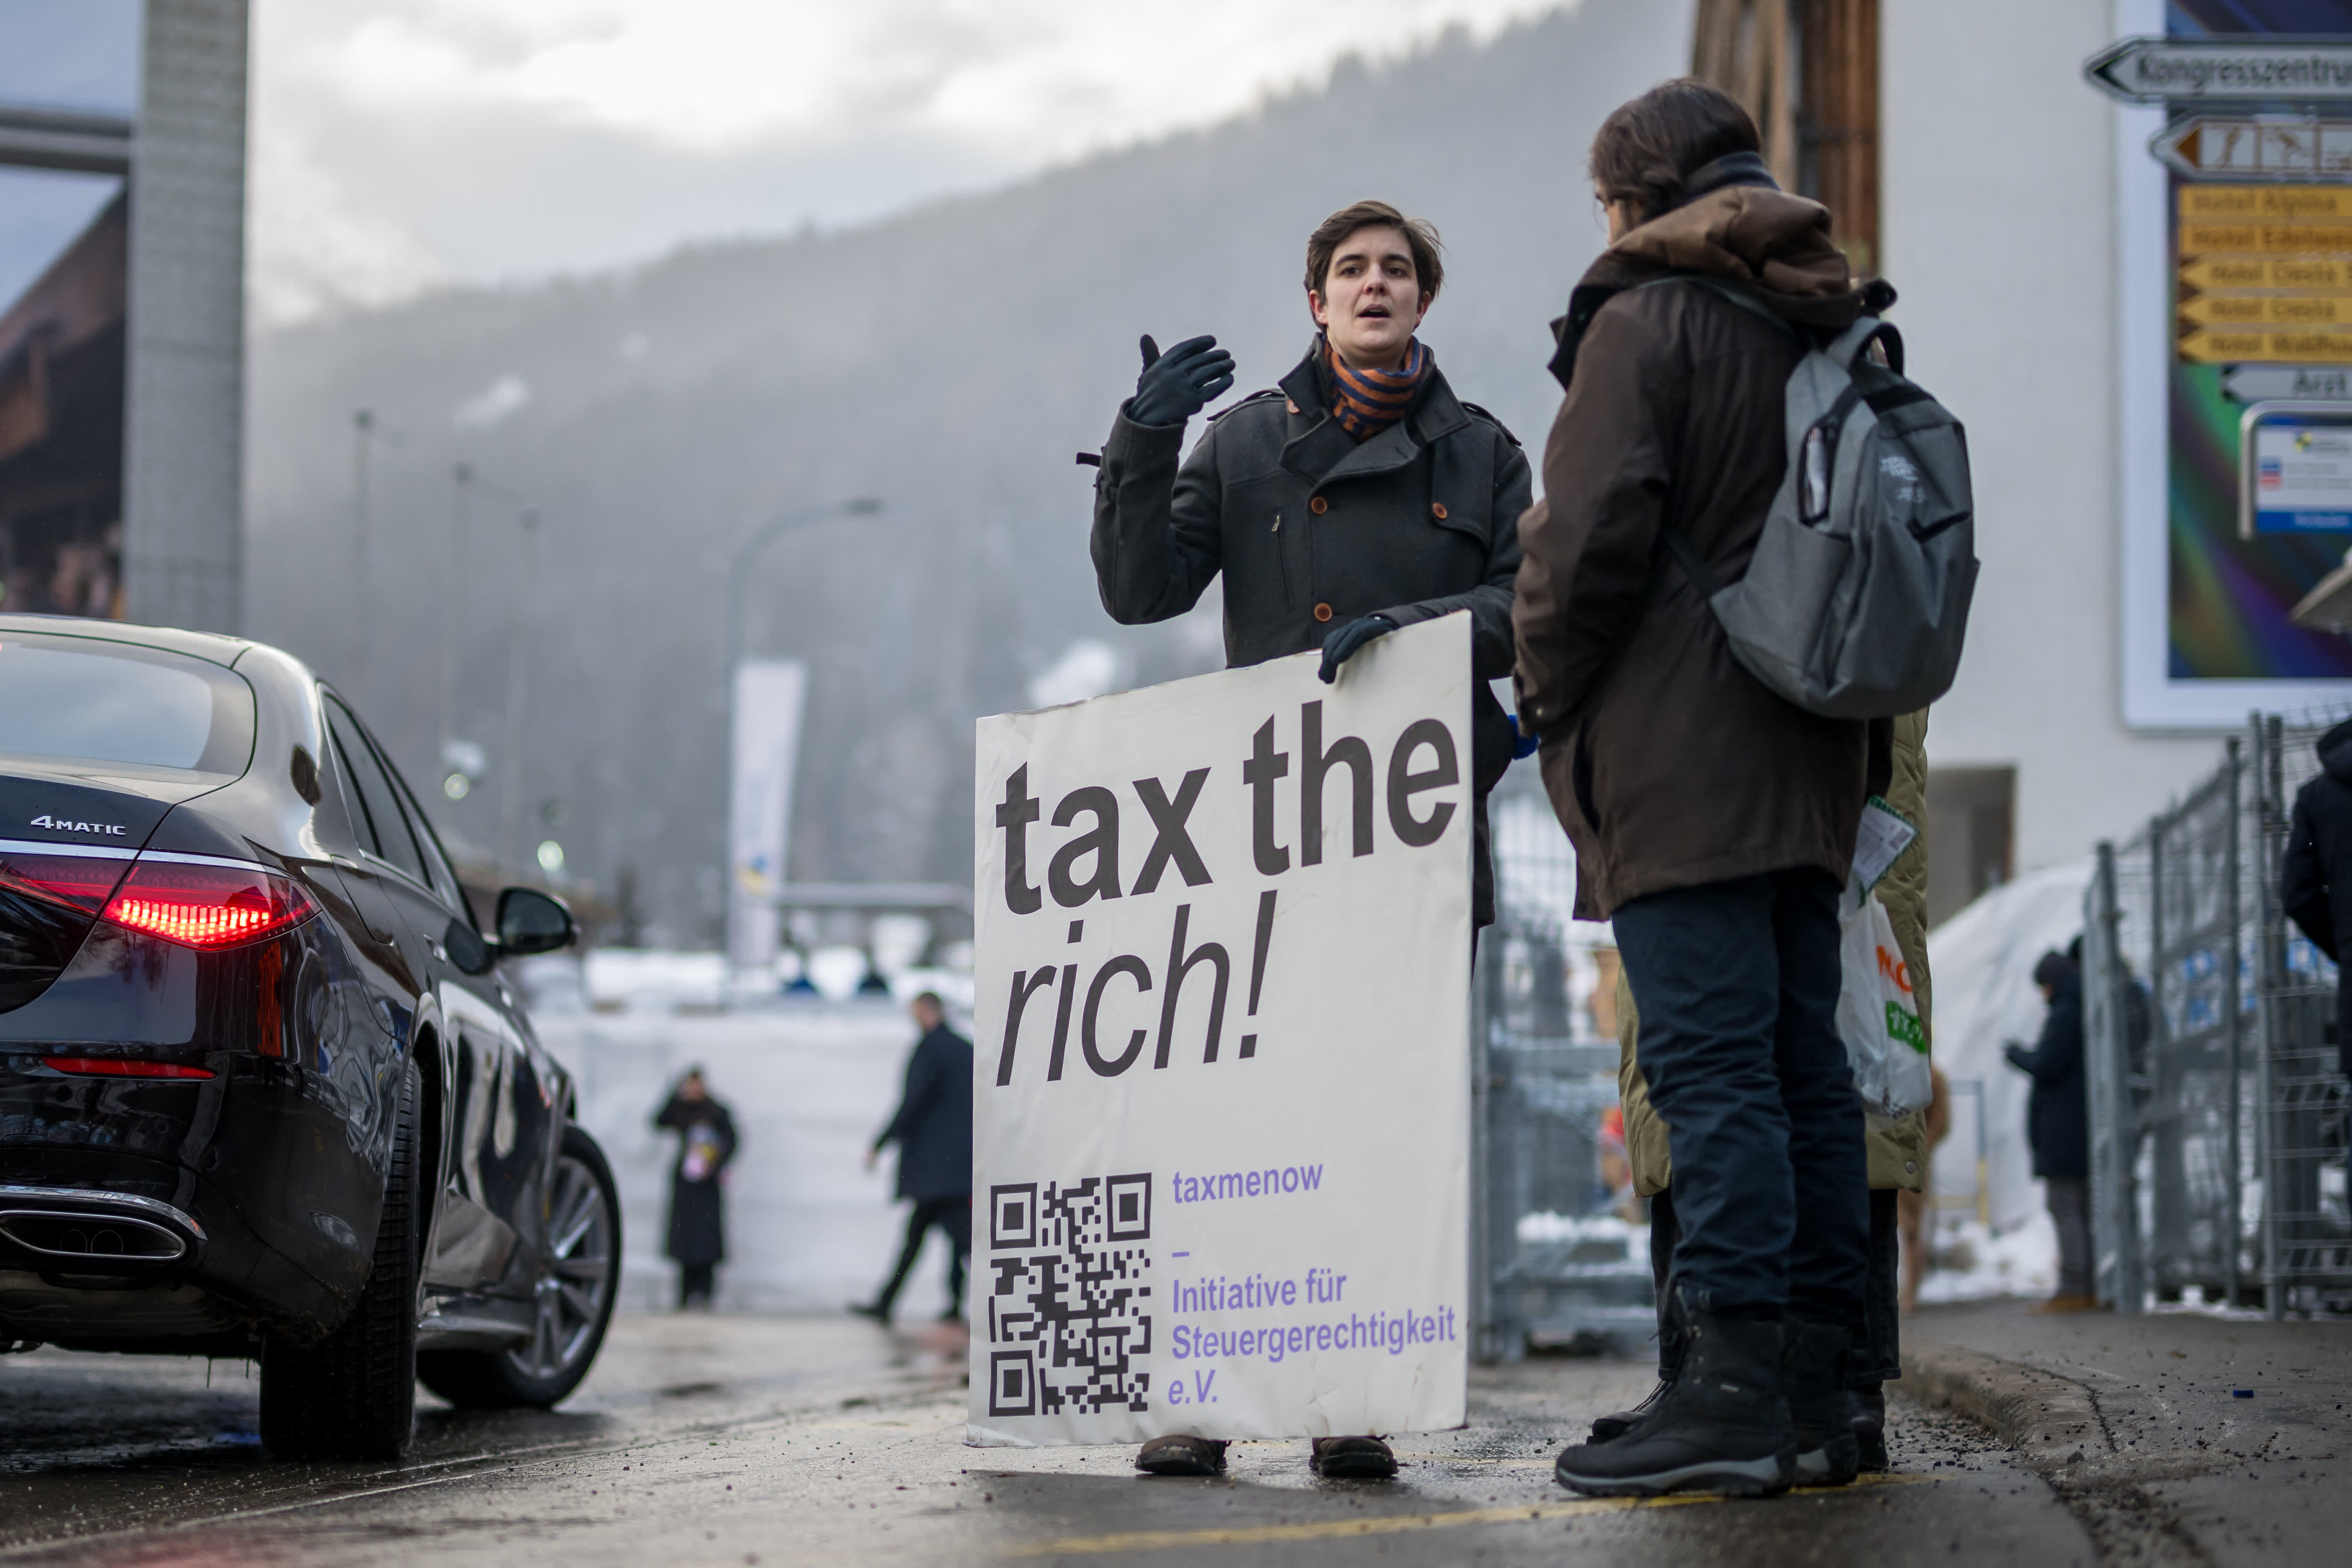 call leaders \'tax our on Mega-rich global at to Davos extreme renew wealth\'